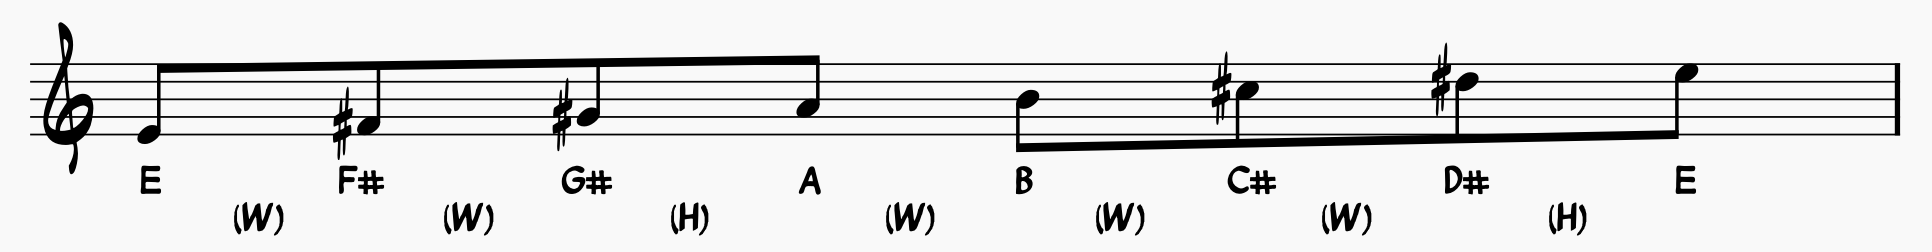 E Major Scale notated with whole steps and half steps